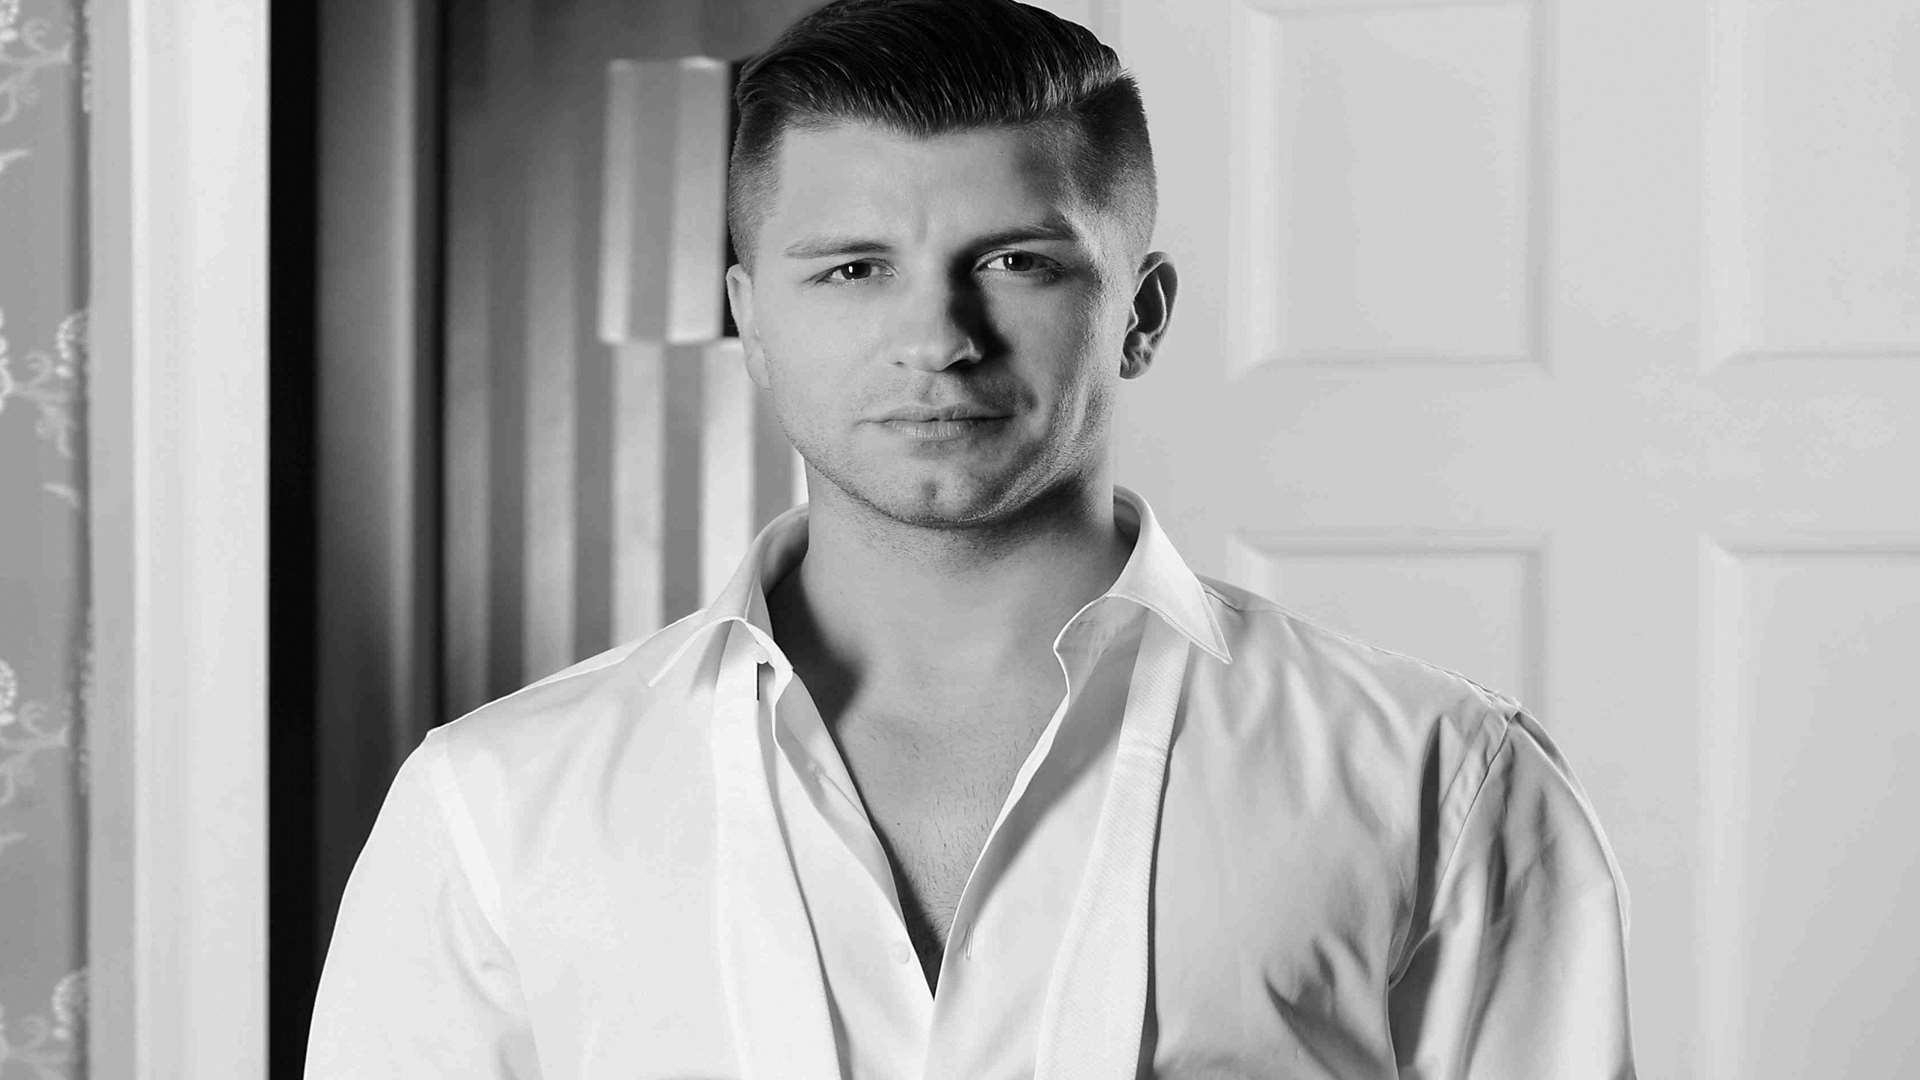 Pasha Kovalev is the most successful Strictly professional